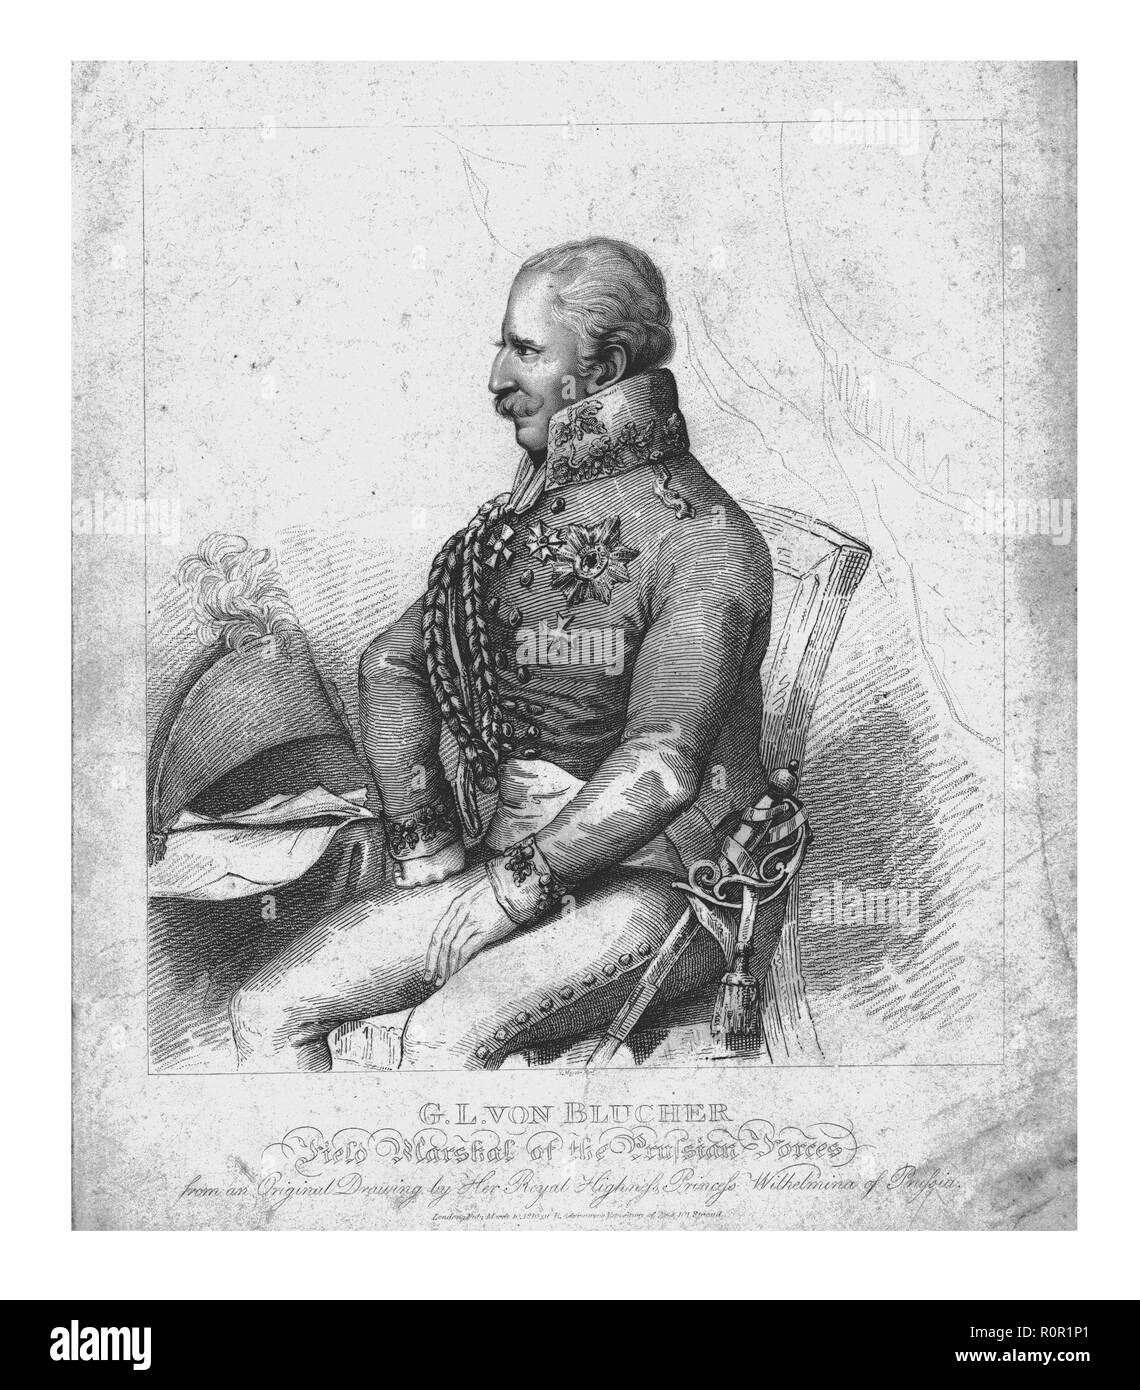 'G. L. von Blucher, Field Marshal of the Prussian Forces', 1814.  Creator: H Meyer. Stock Photo